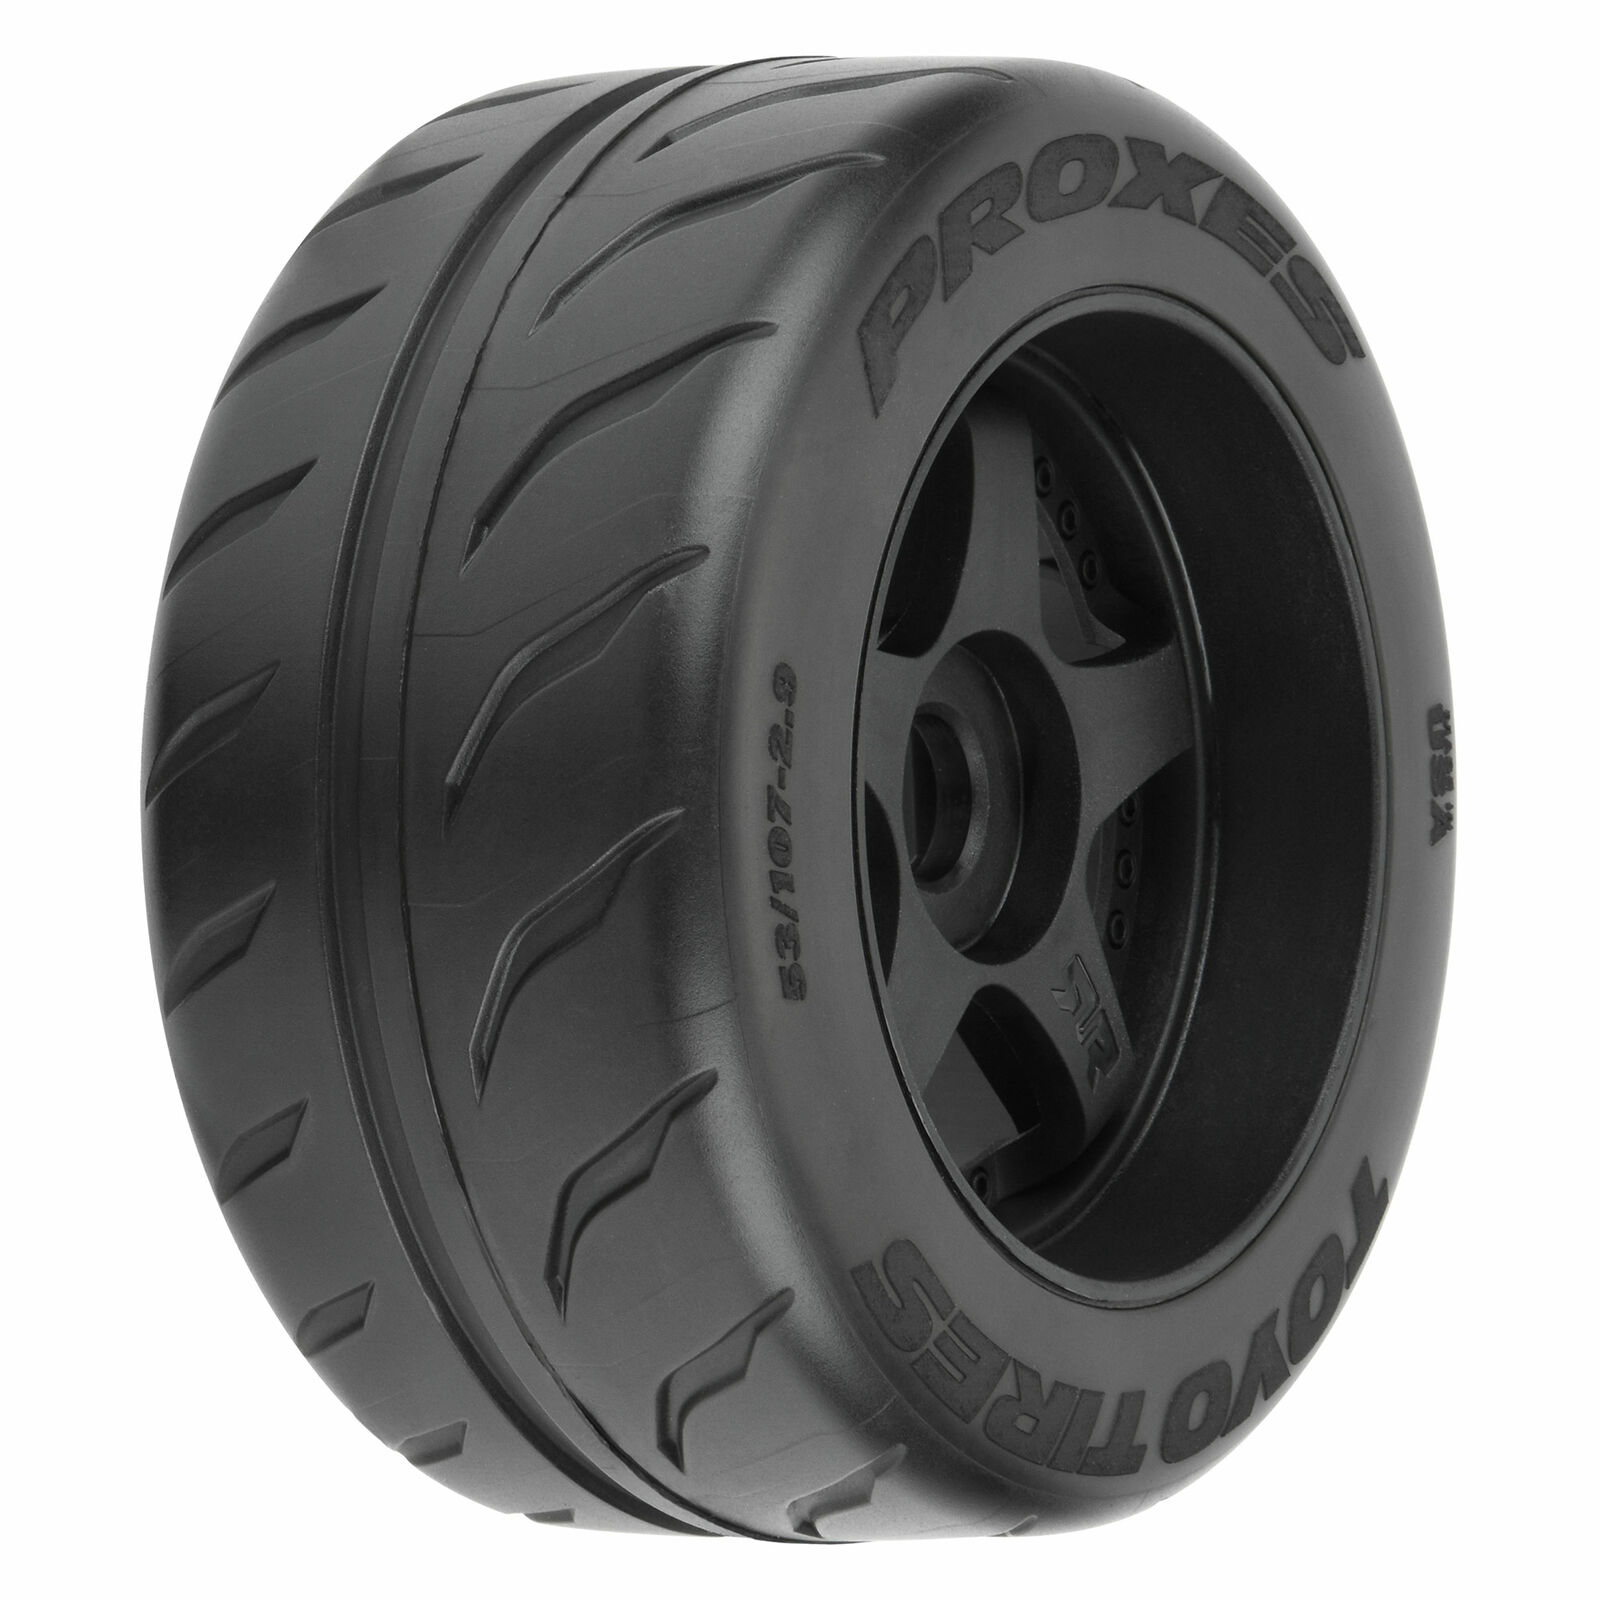 Pro-Line Racing 1/7 Toyo Proxes R888R S3 Rear 53/107 2.9" BELTED Mounted 17mm